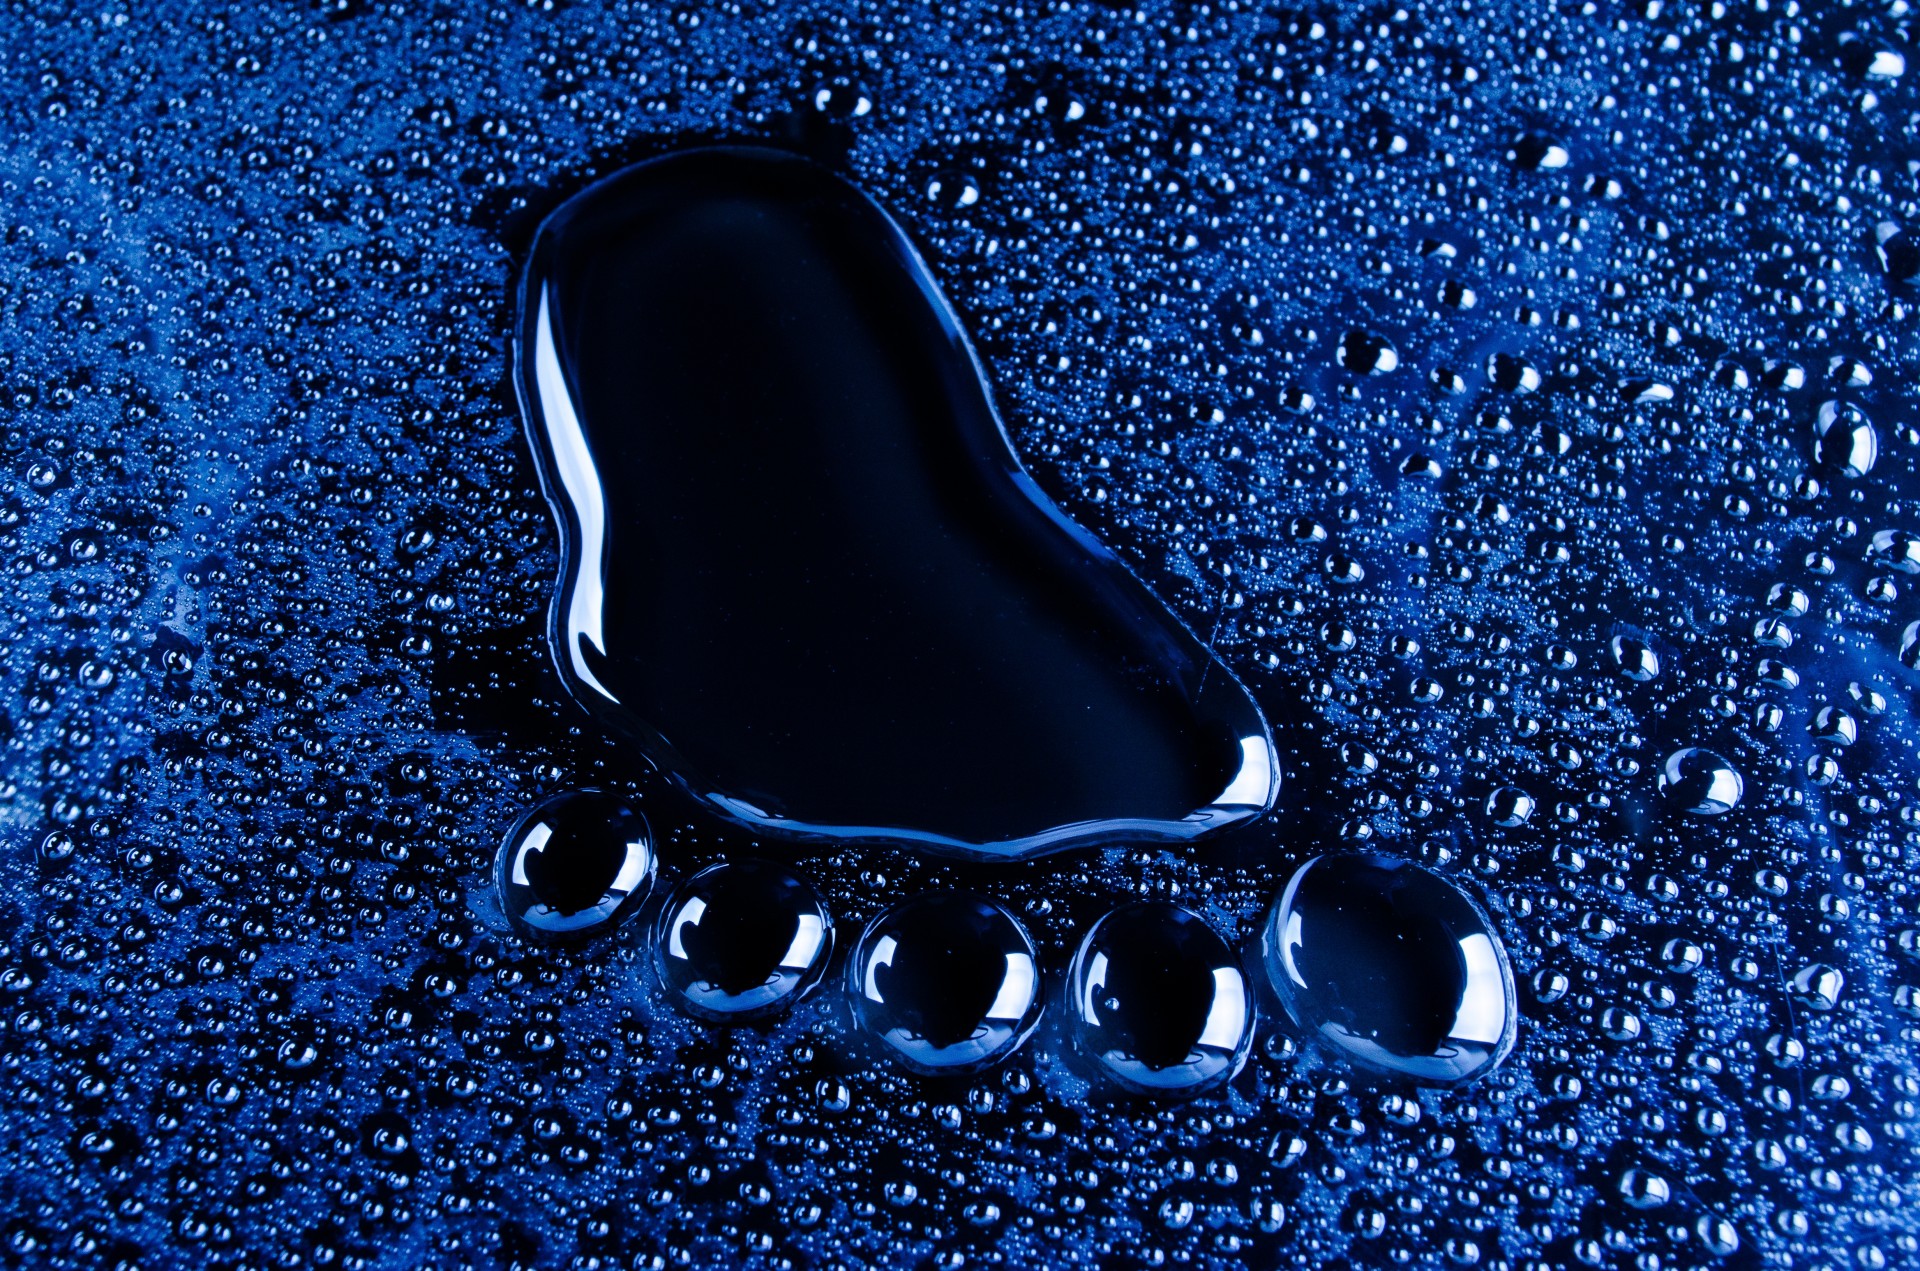 The footprint made up of water on blue background